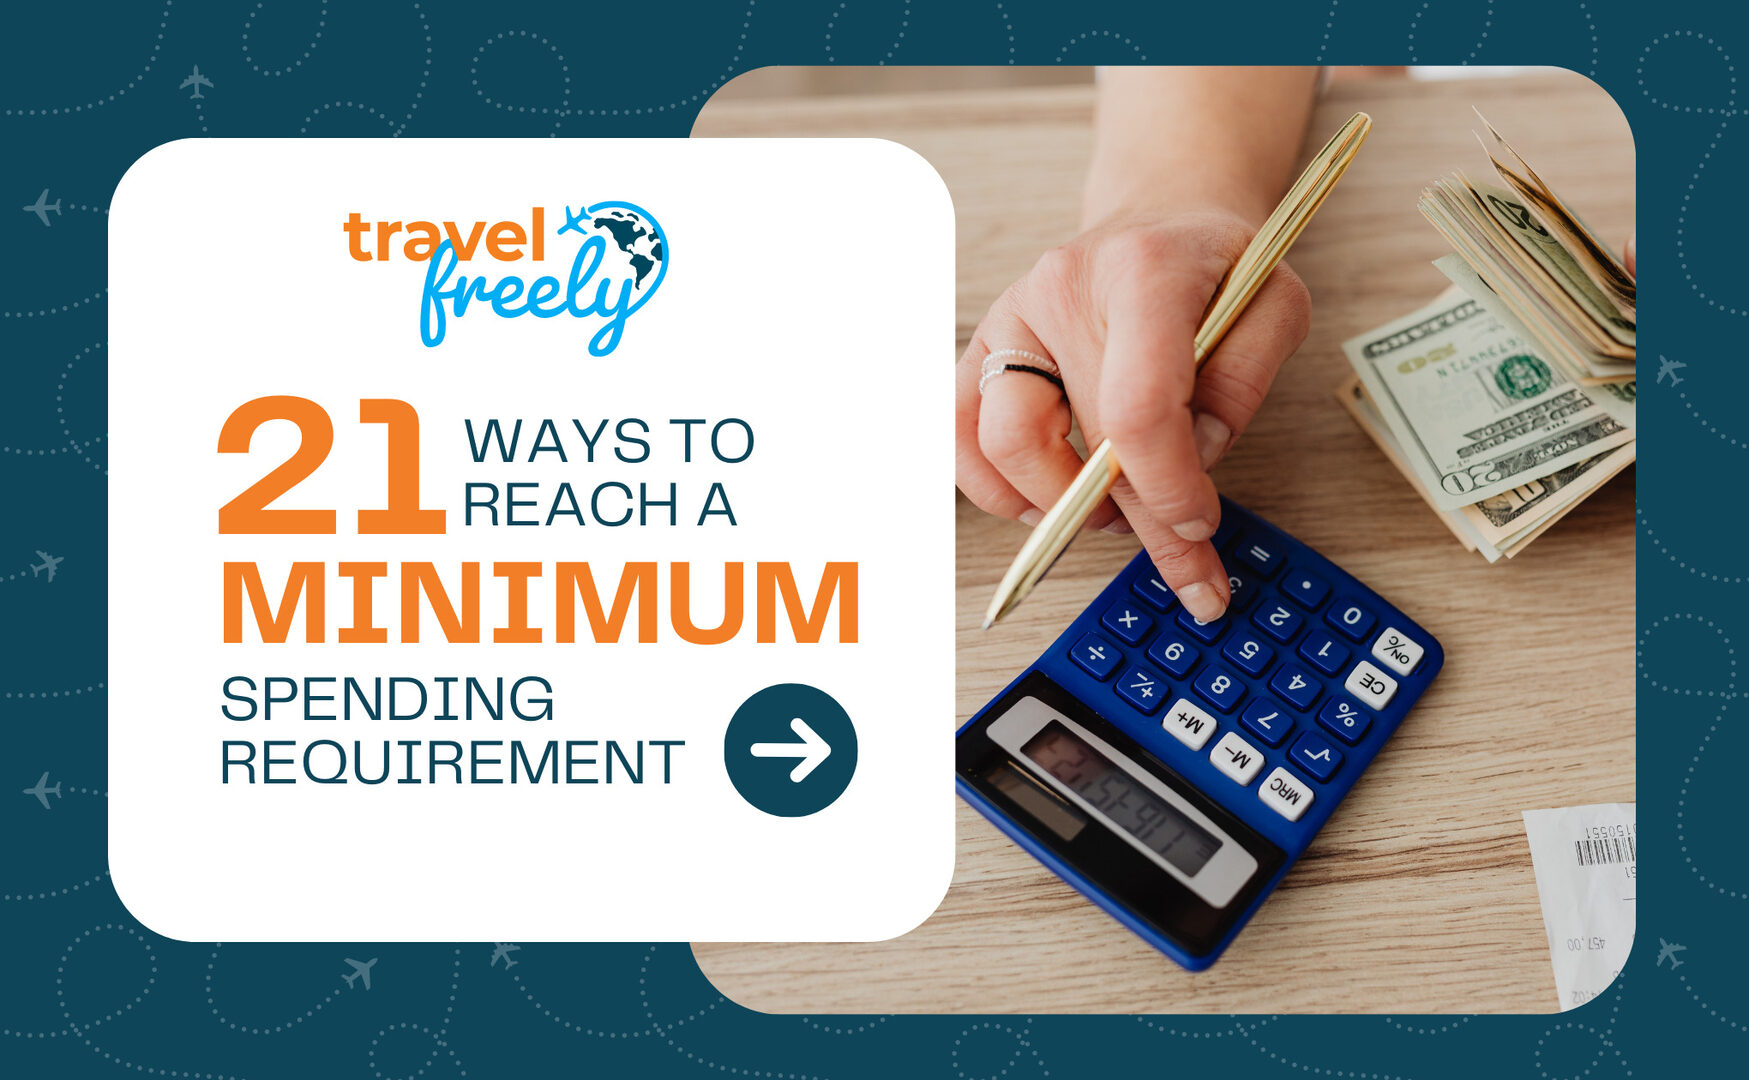 21 Ways to Reach a Minimum Spending Requirement